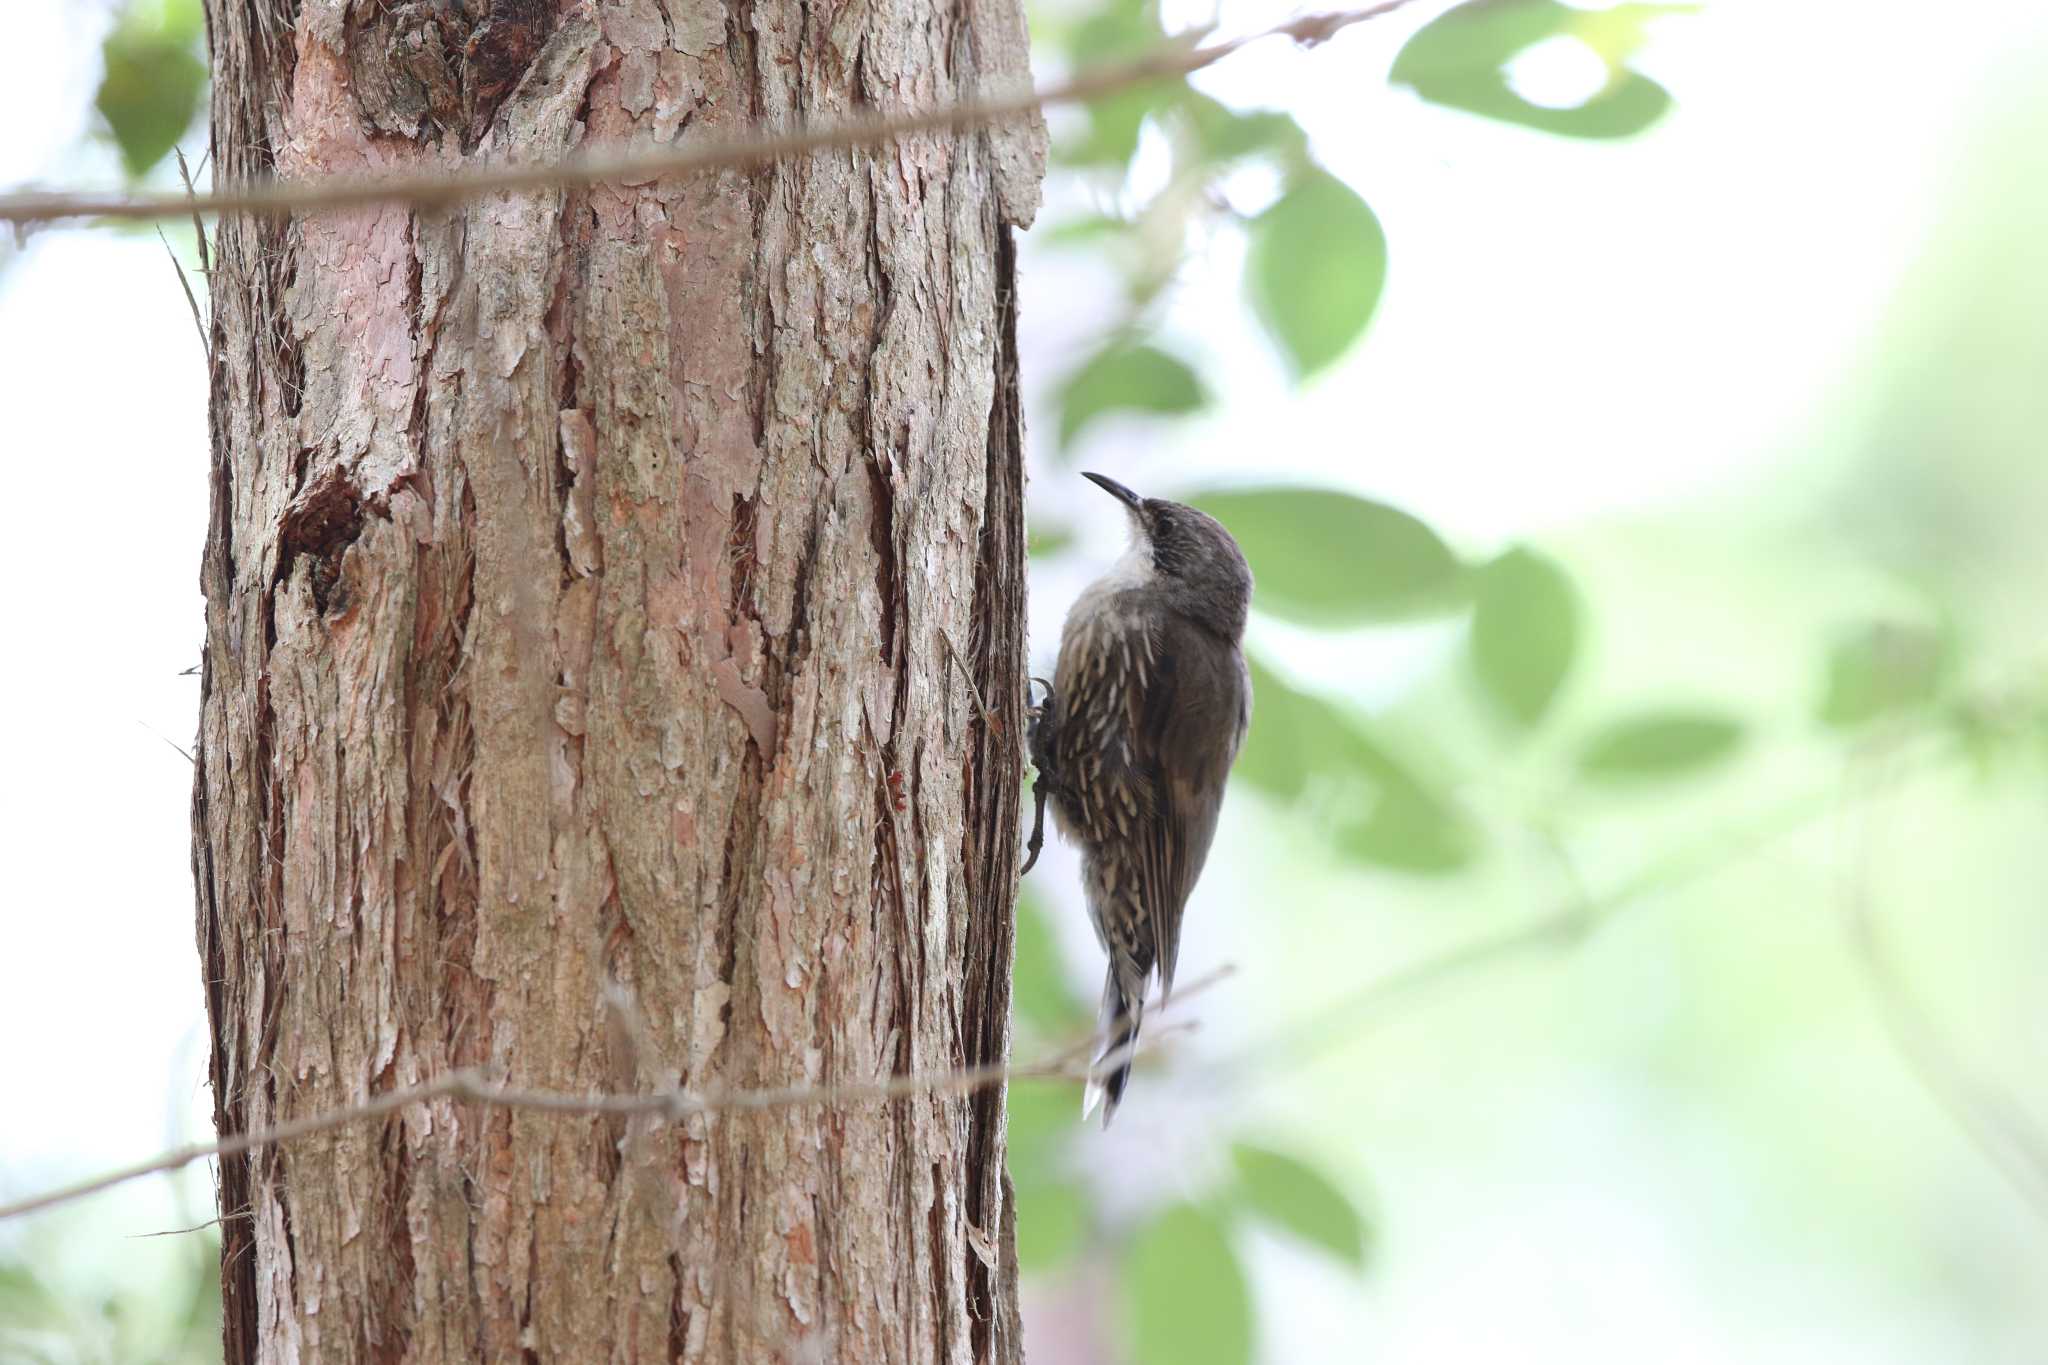 Photo of White-throated Treecreeper at Royal National Park by Trio